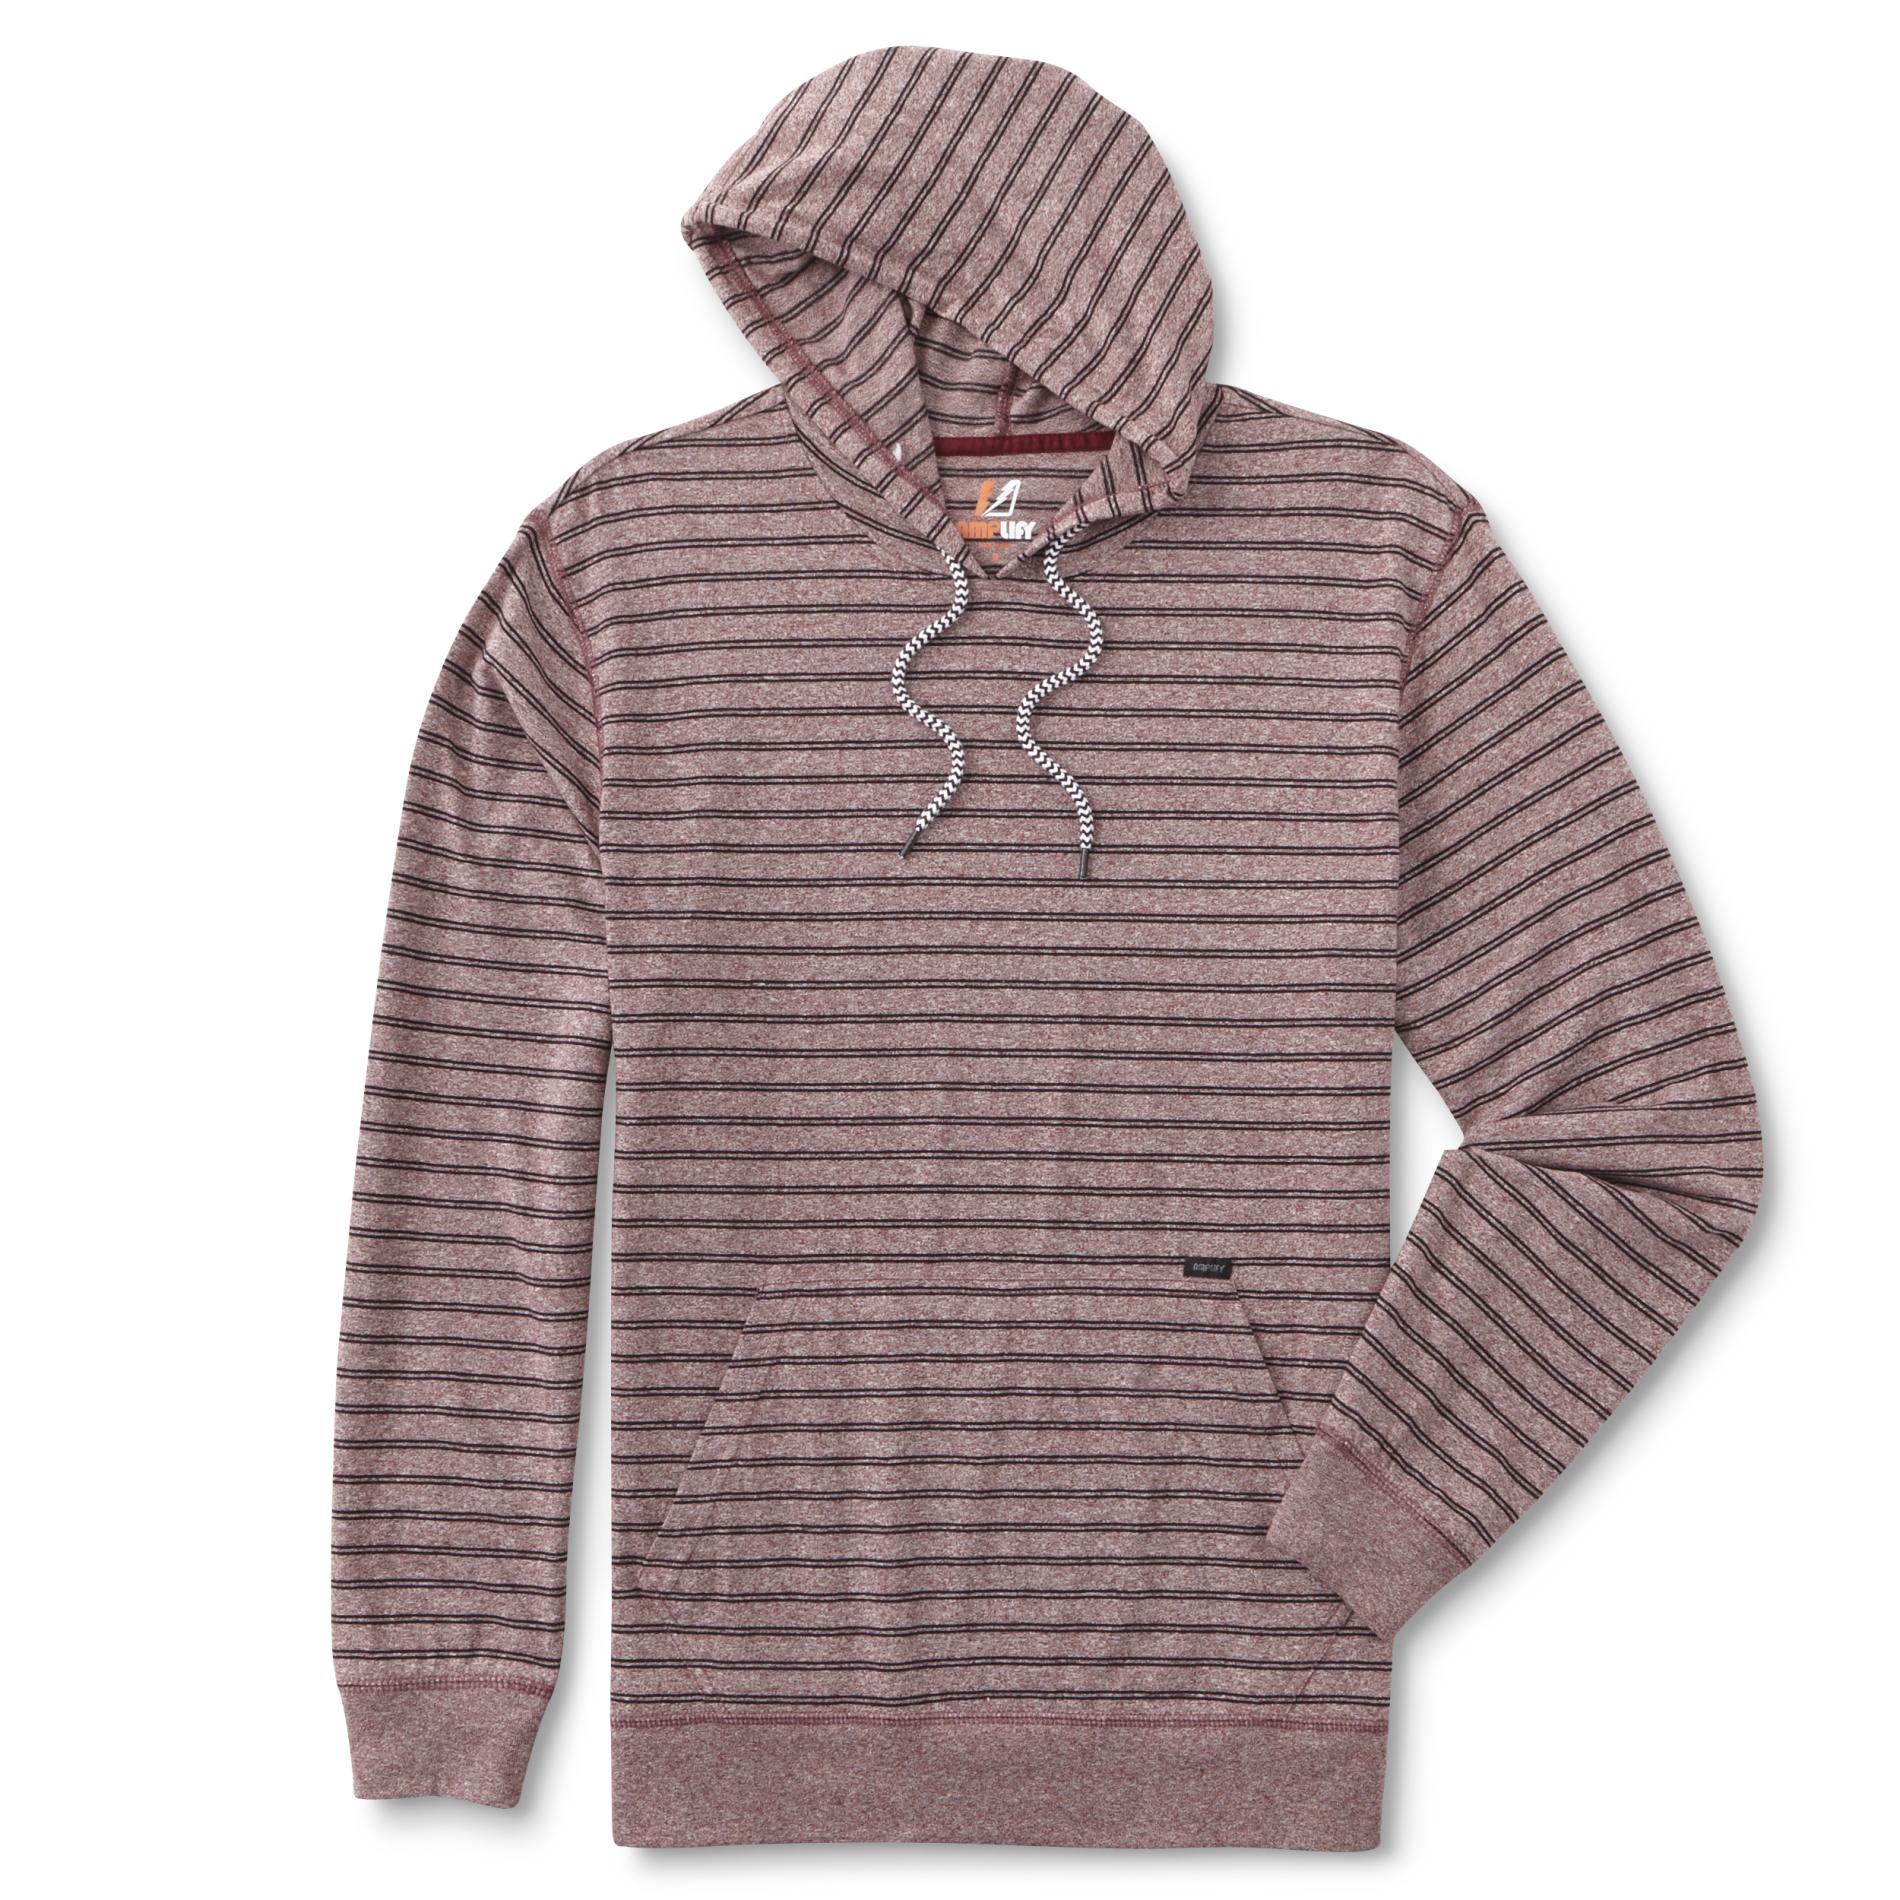 Amplify Young Men's Hoodie - Striped